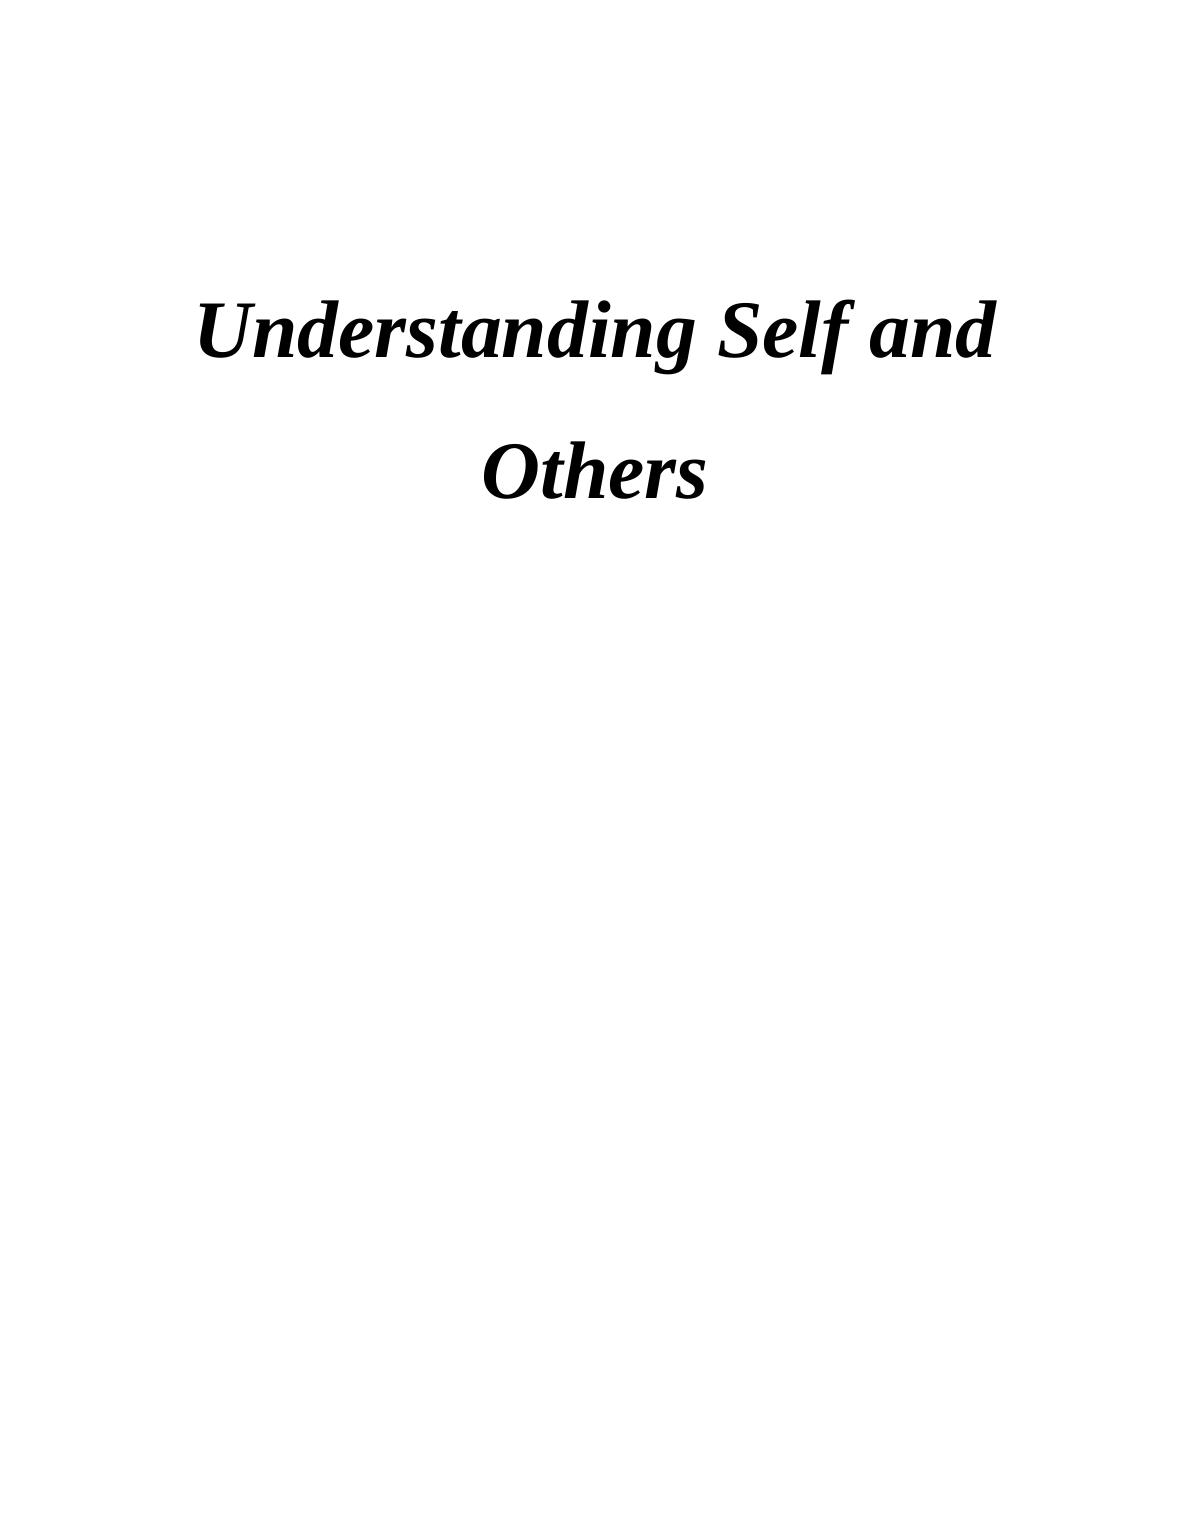 Understanding Self and Others_1